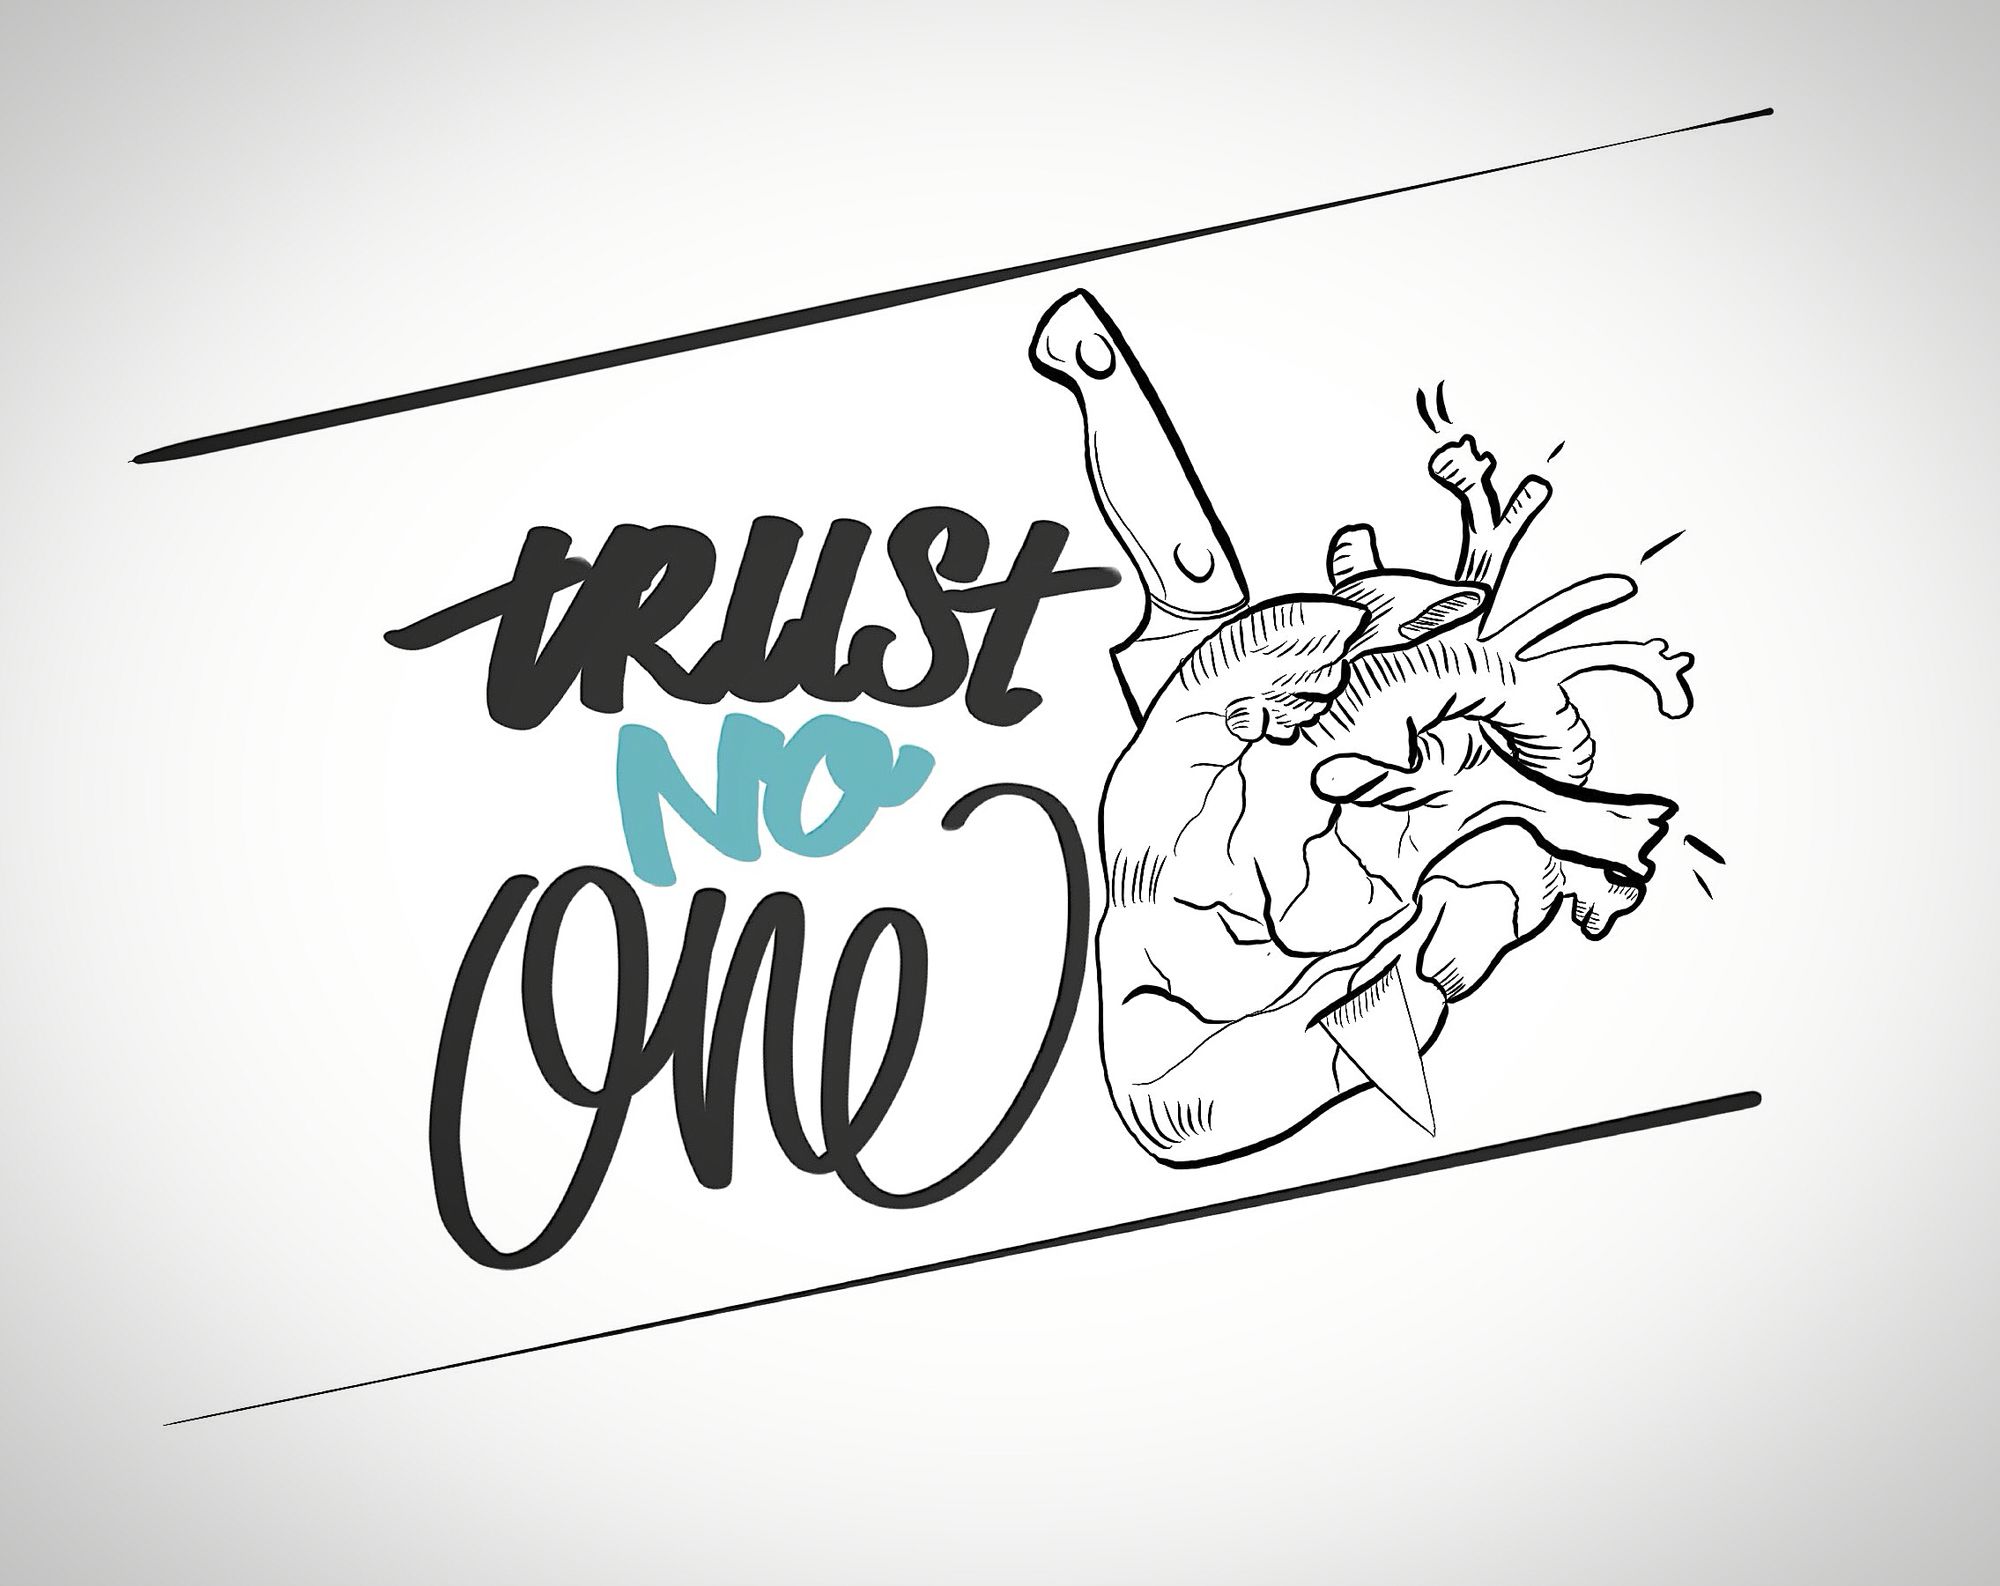 Blakc and blue heart with trust no one tattoo design